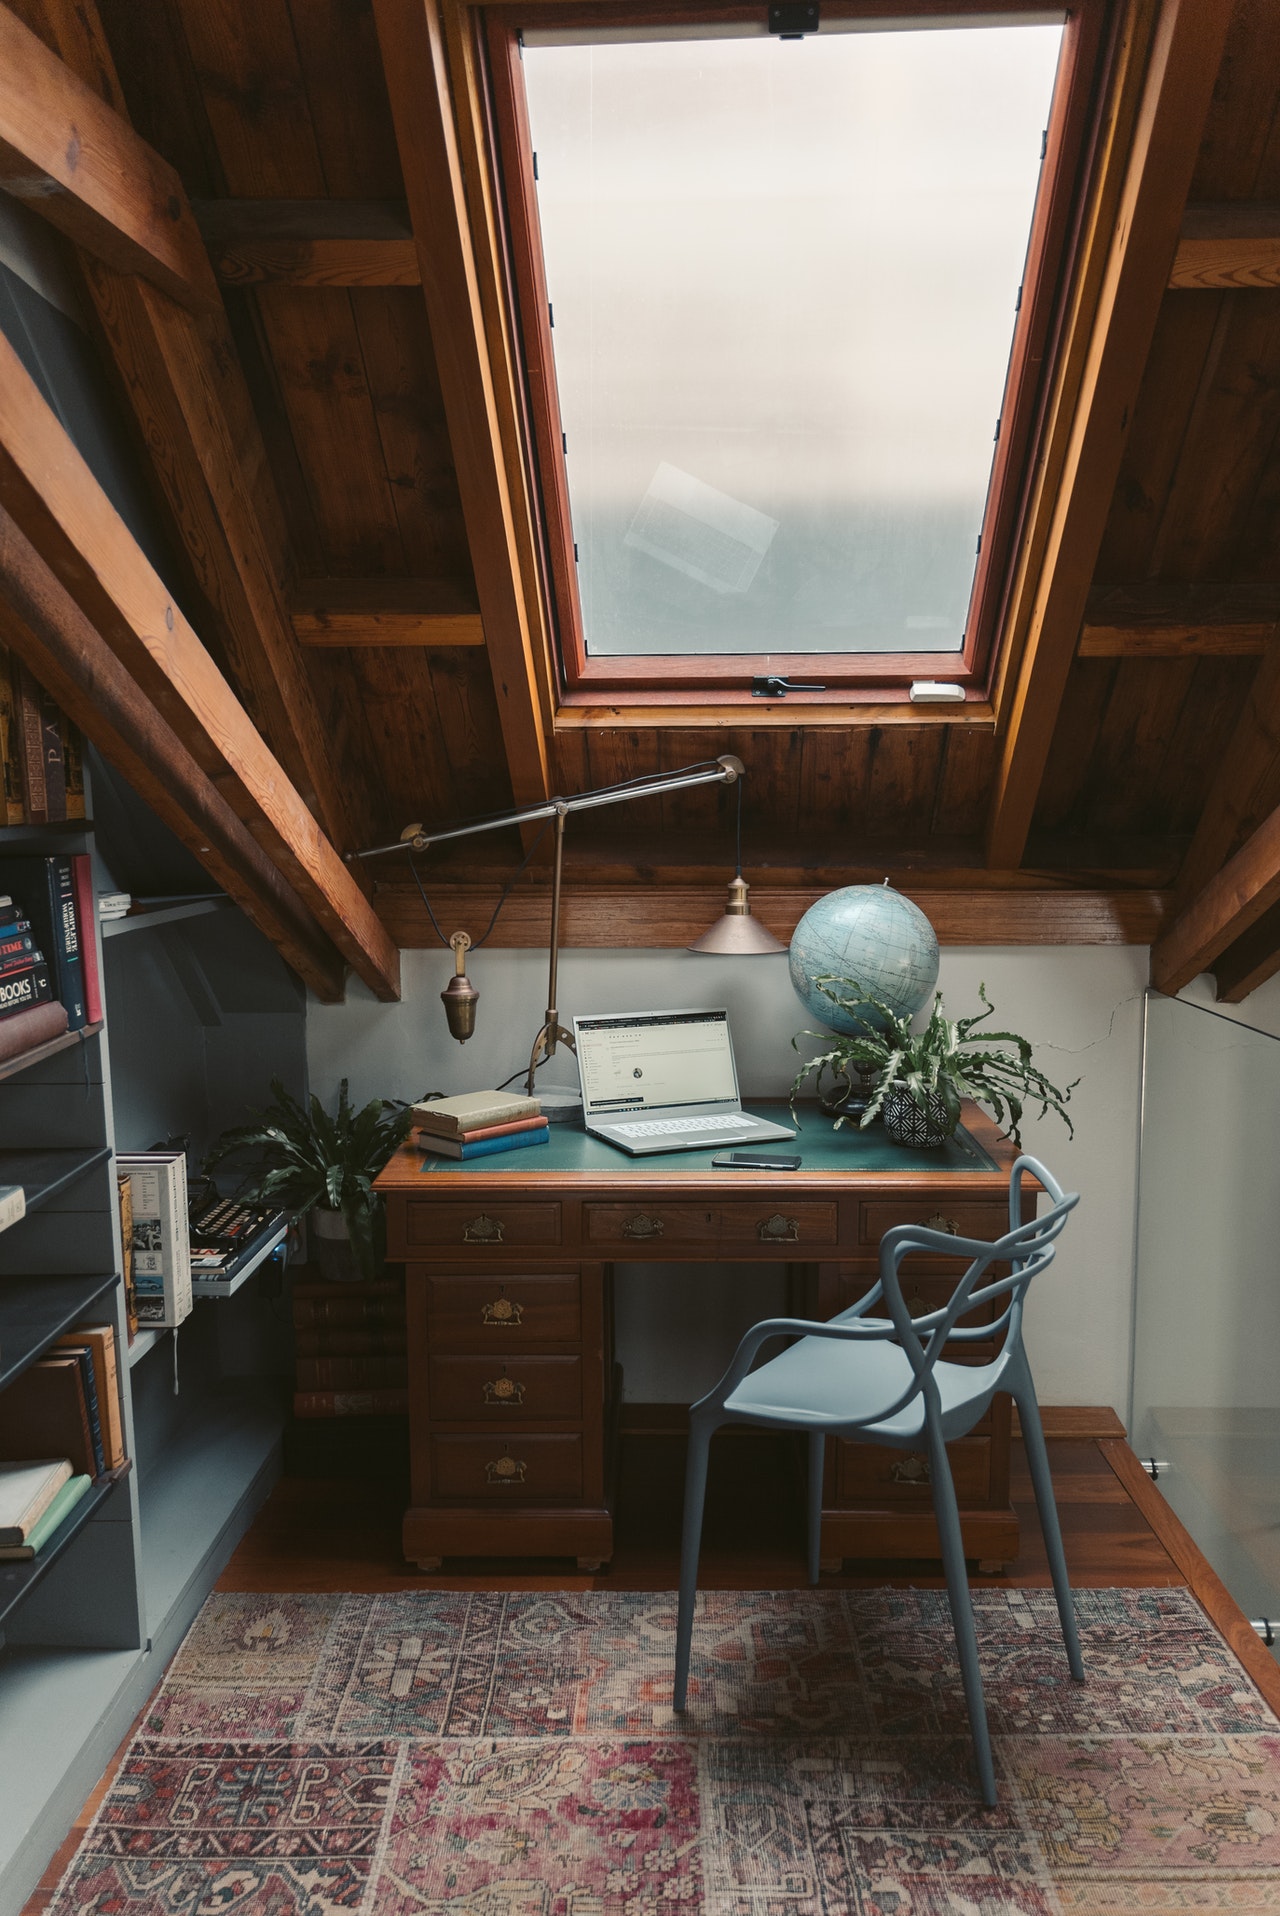 Desk in the attic with a skylight